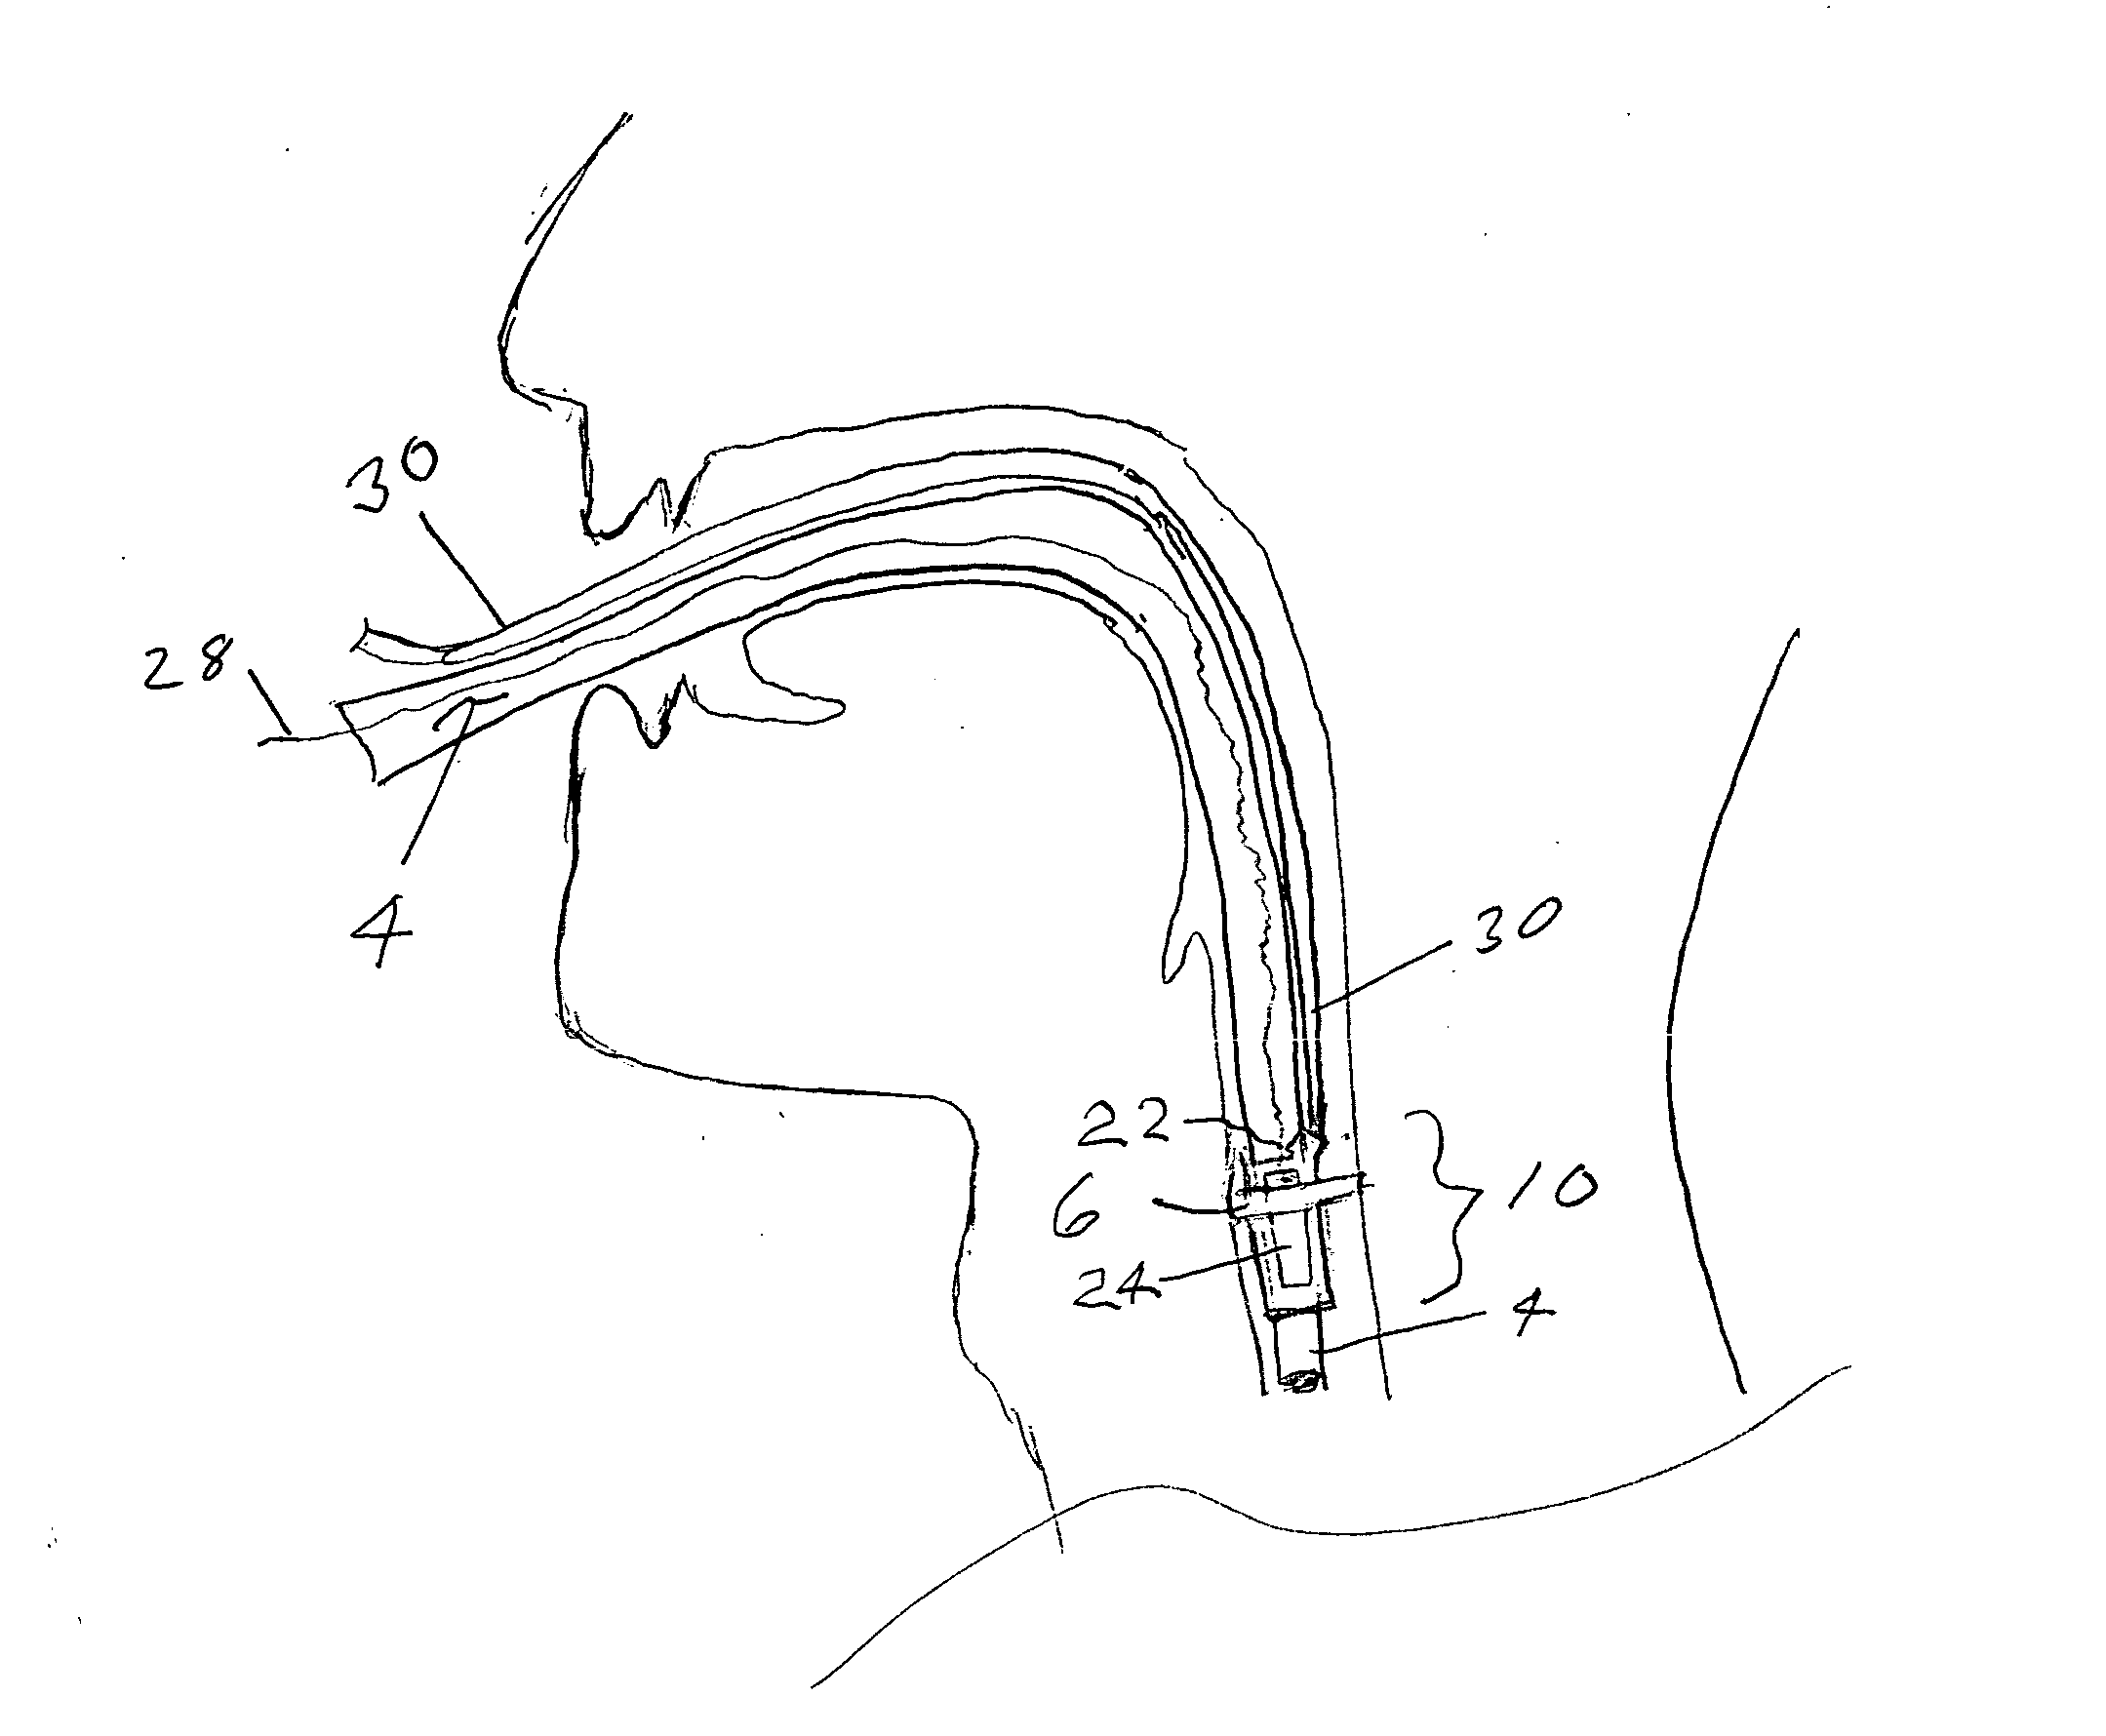 Endotracheal electrode and optical positioning device